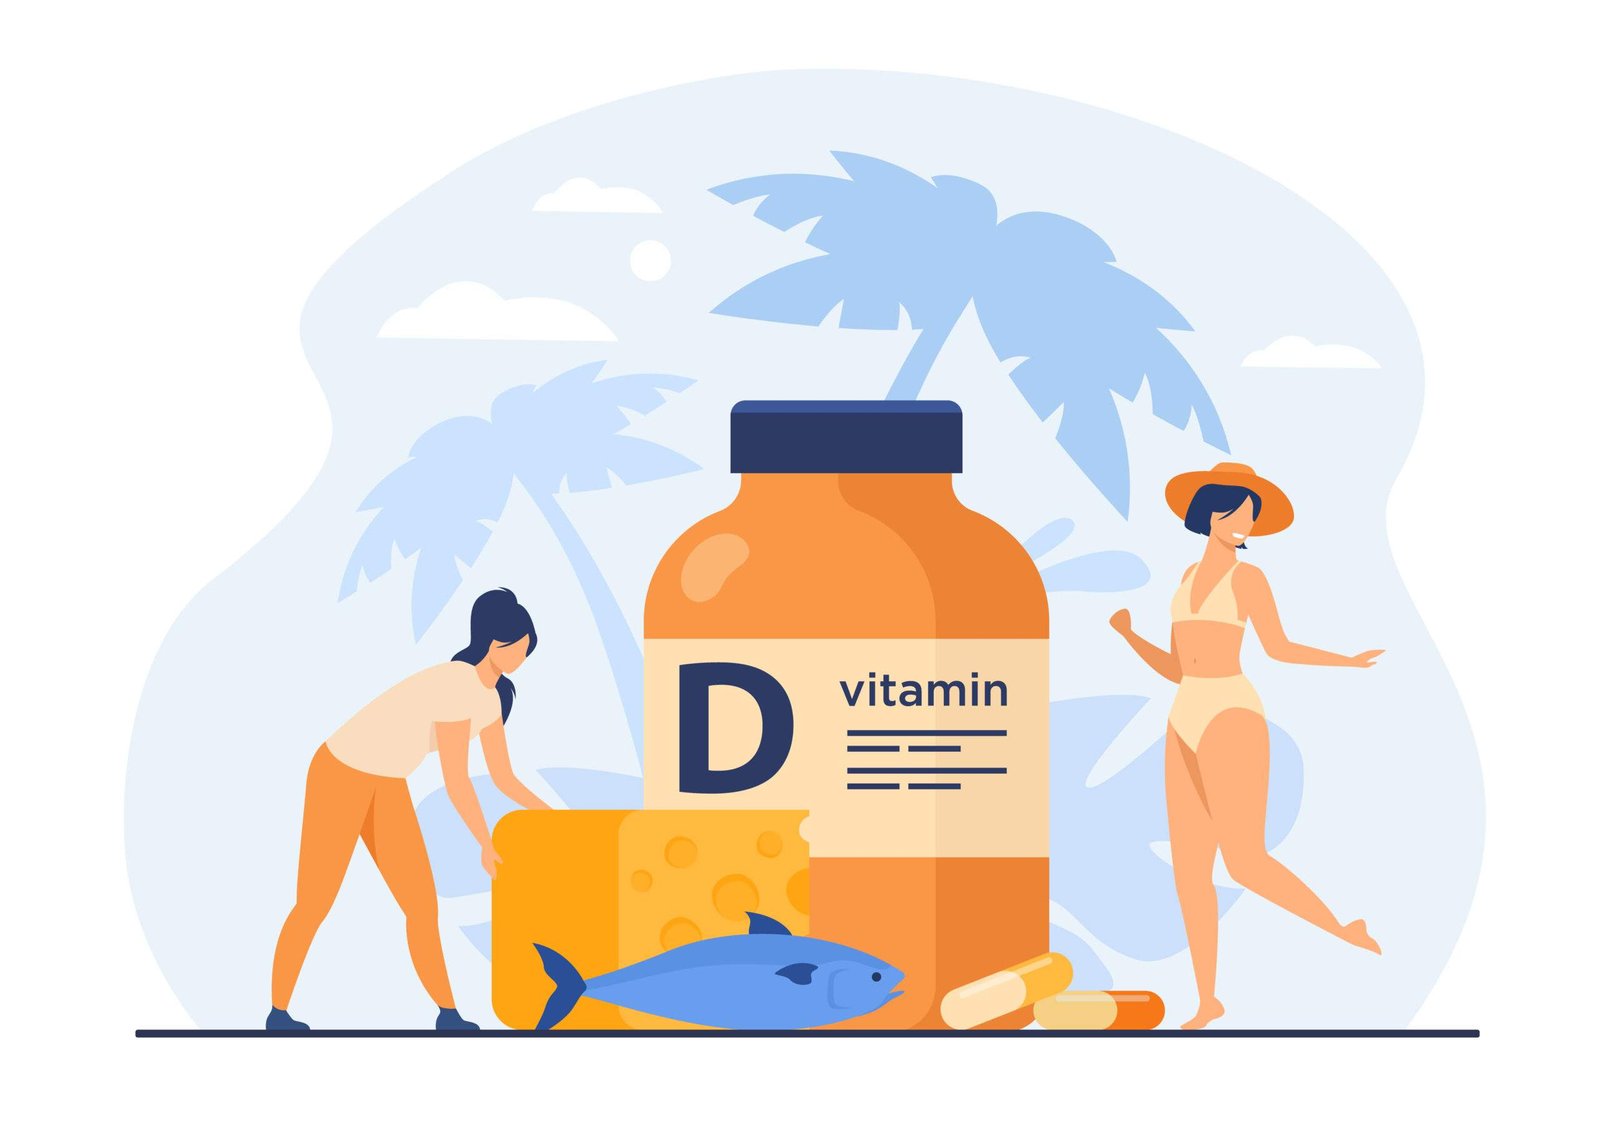 What exactly is vitamin D